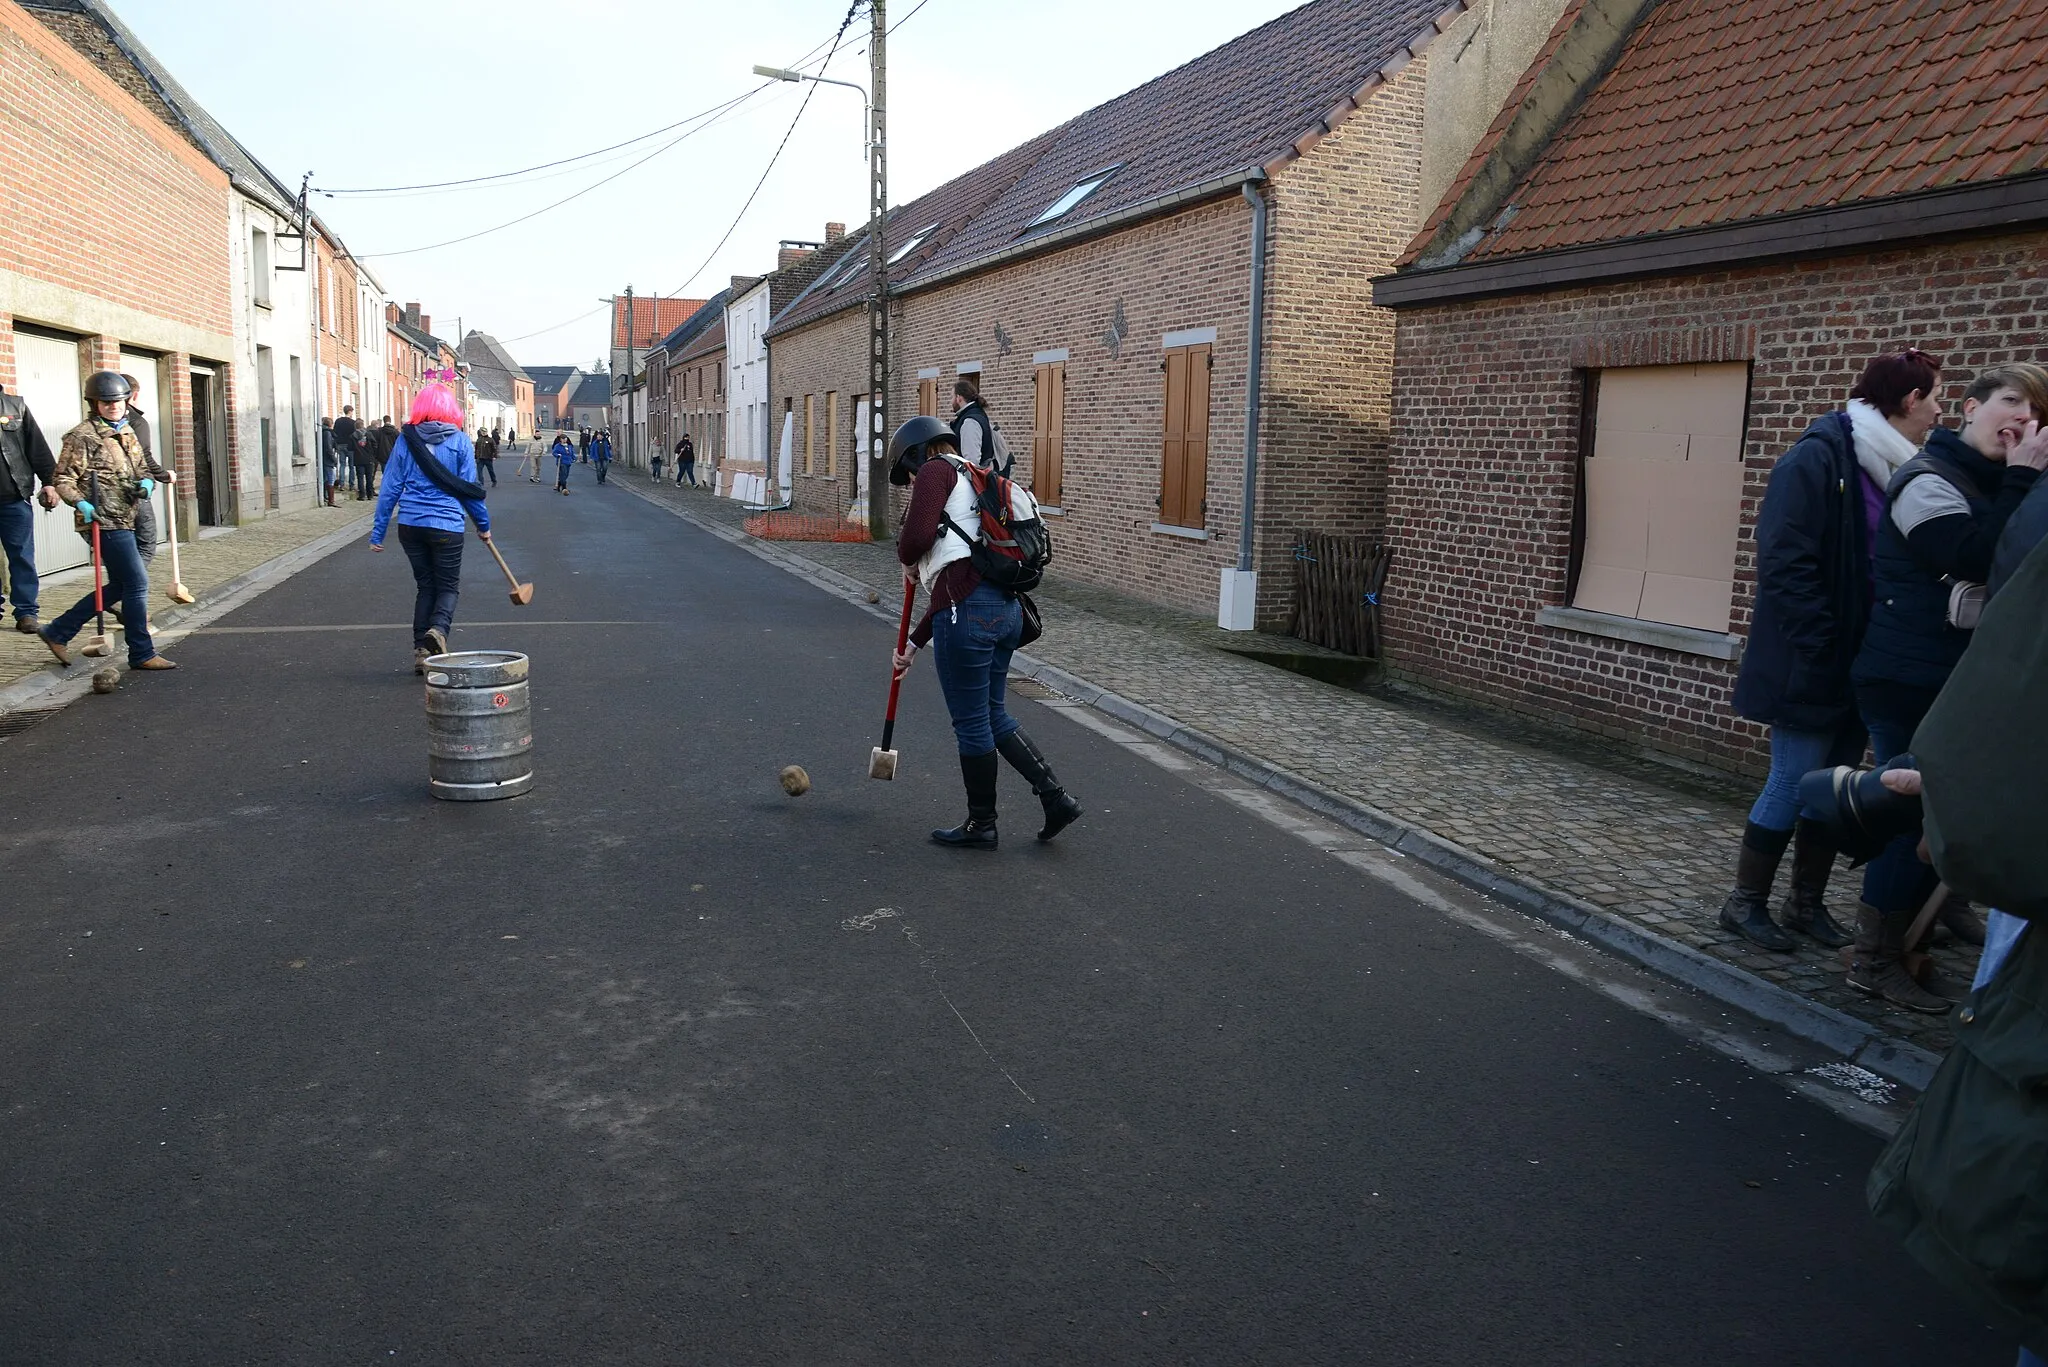 Photo showing: U.S. Air Force Master Sgt. Darcy Babutzke, NATO Communications and Information Agency, Supreme Headquarters Allied Powers in Europe (SHAPE), is about to finish off a game as she participates in traditional a festivity in the town of Chièvres, Belgium, Feb. 18, 2015. This annual golf-like, medieval sport of “crossage," takes place the day after Mardi Gras. Players drive a oak ball, called a “chôlette” (pronounced: show-let), with a wooden club, or “rabot” (pronounced: rah-bo), into metal kegs targets set up around town. Whenever a player is ready to swing, he yells: “Chôlette.”(U.S. Army photo by Visual Information Specialist Henri Cambier/Released)